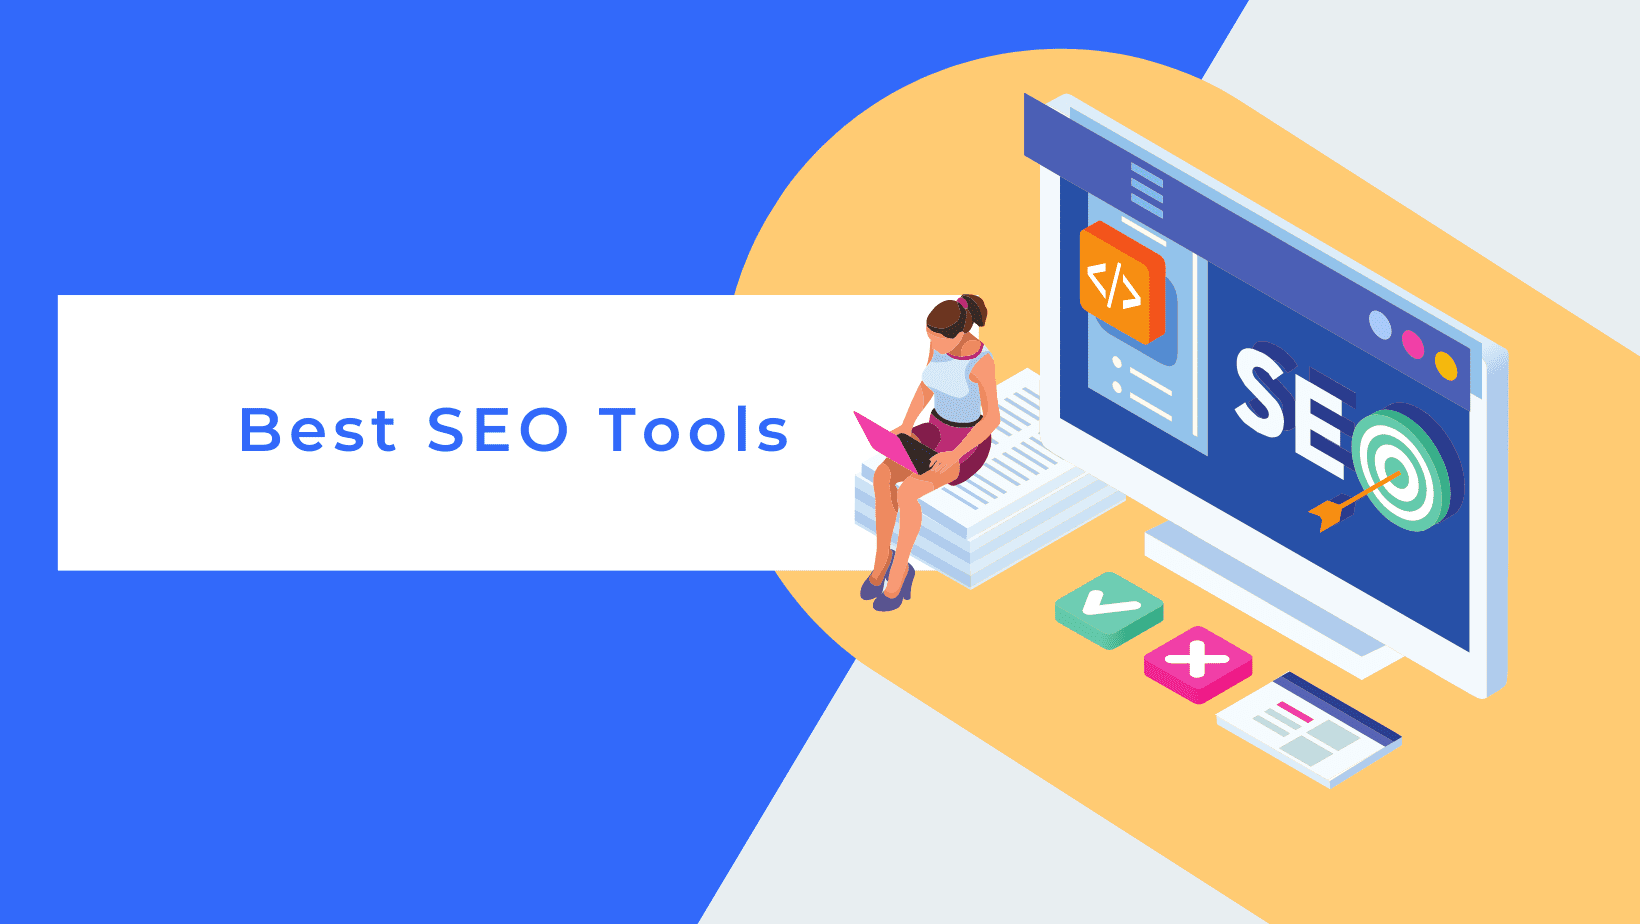 Featured image for the best SEO tools with a rocket and search bar